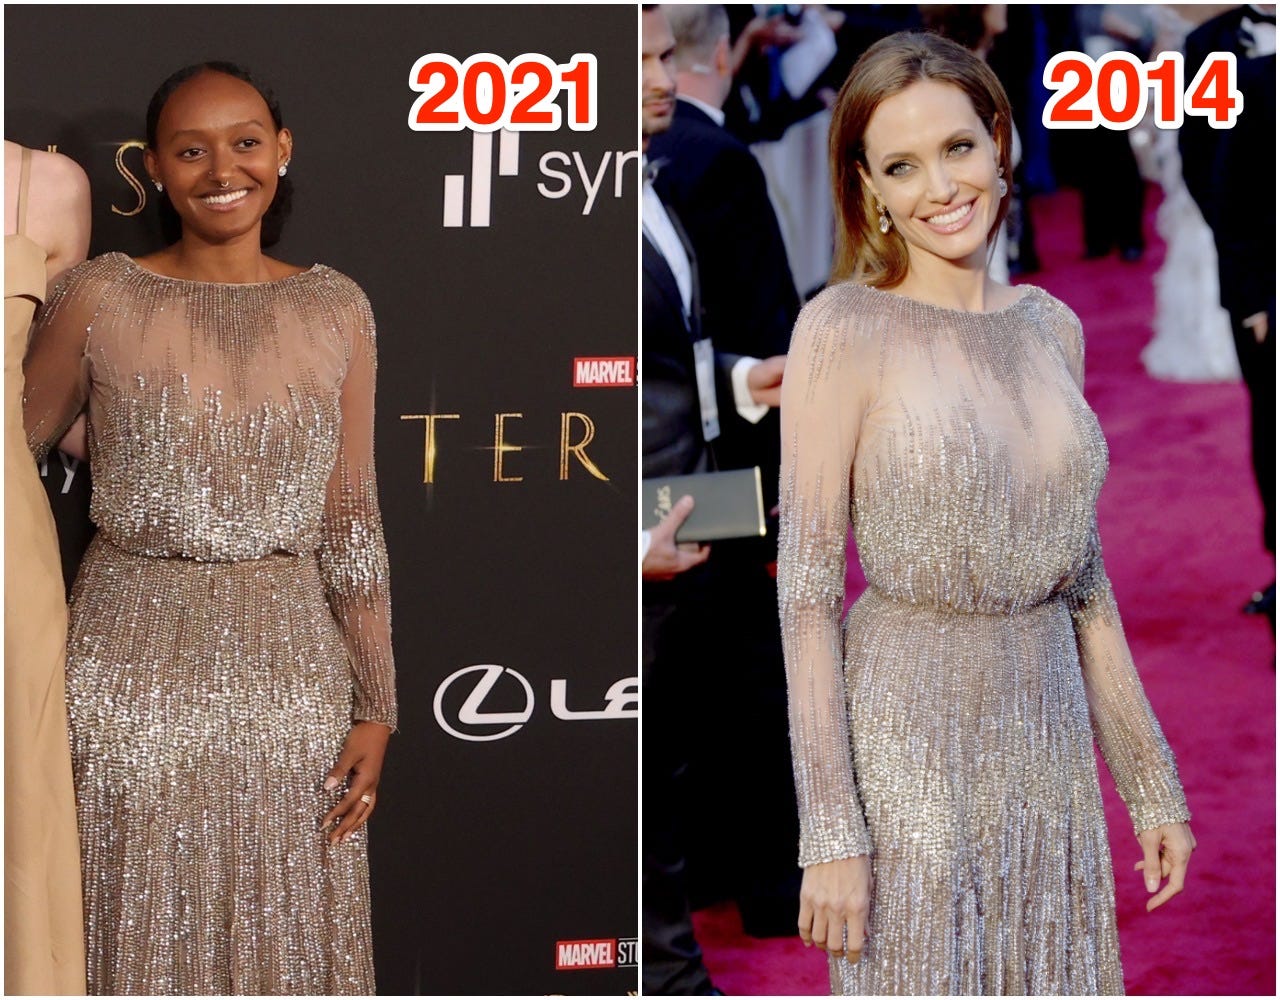 Zahara Jolie-Pitt wearing the same Elie Saab gown in 2021 (left) that her mother Angelina Jolie wore to the Oscars in 2014 (right).